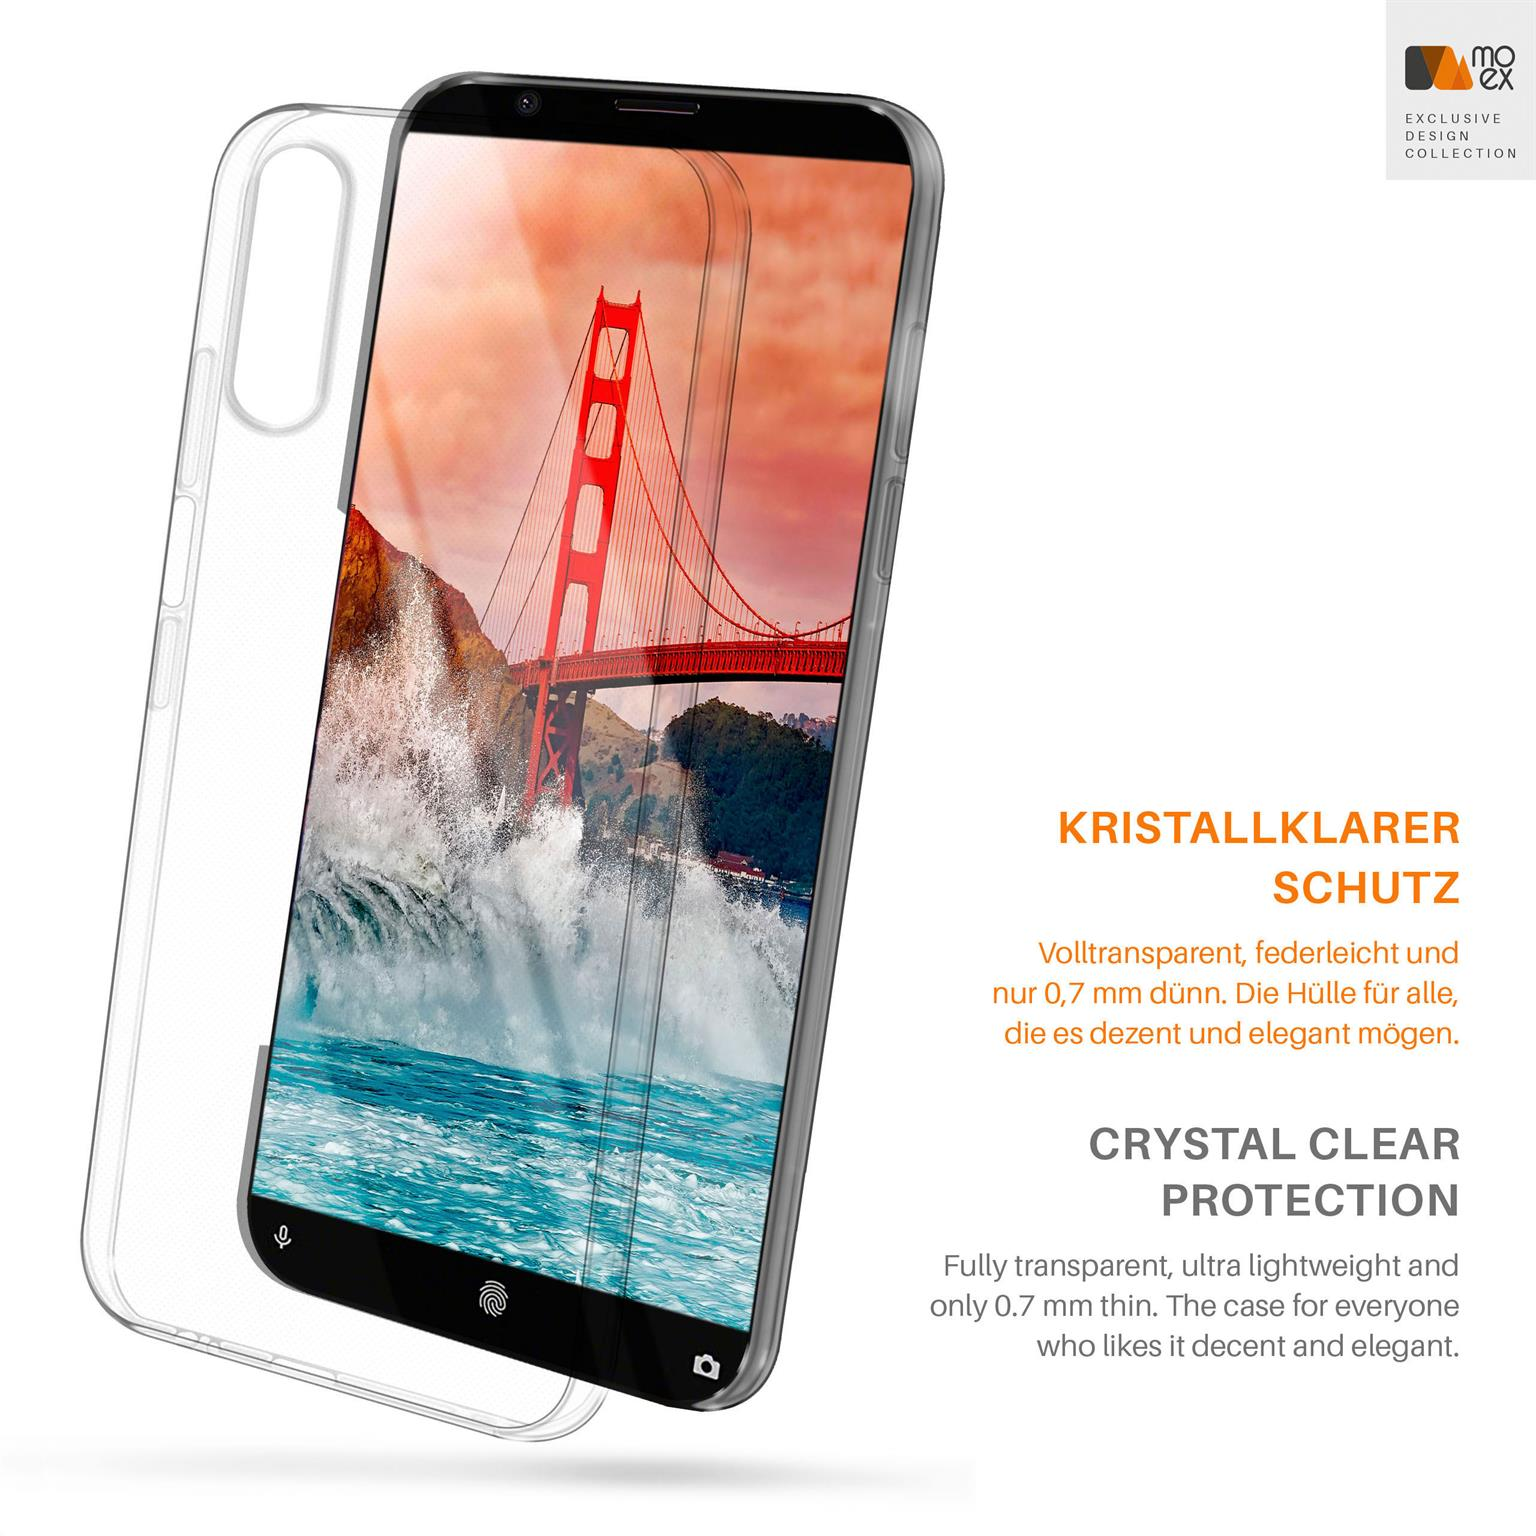 Sony, Crystal-Clear Backcover, MOEX Xperia 5, Aero Case,